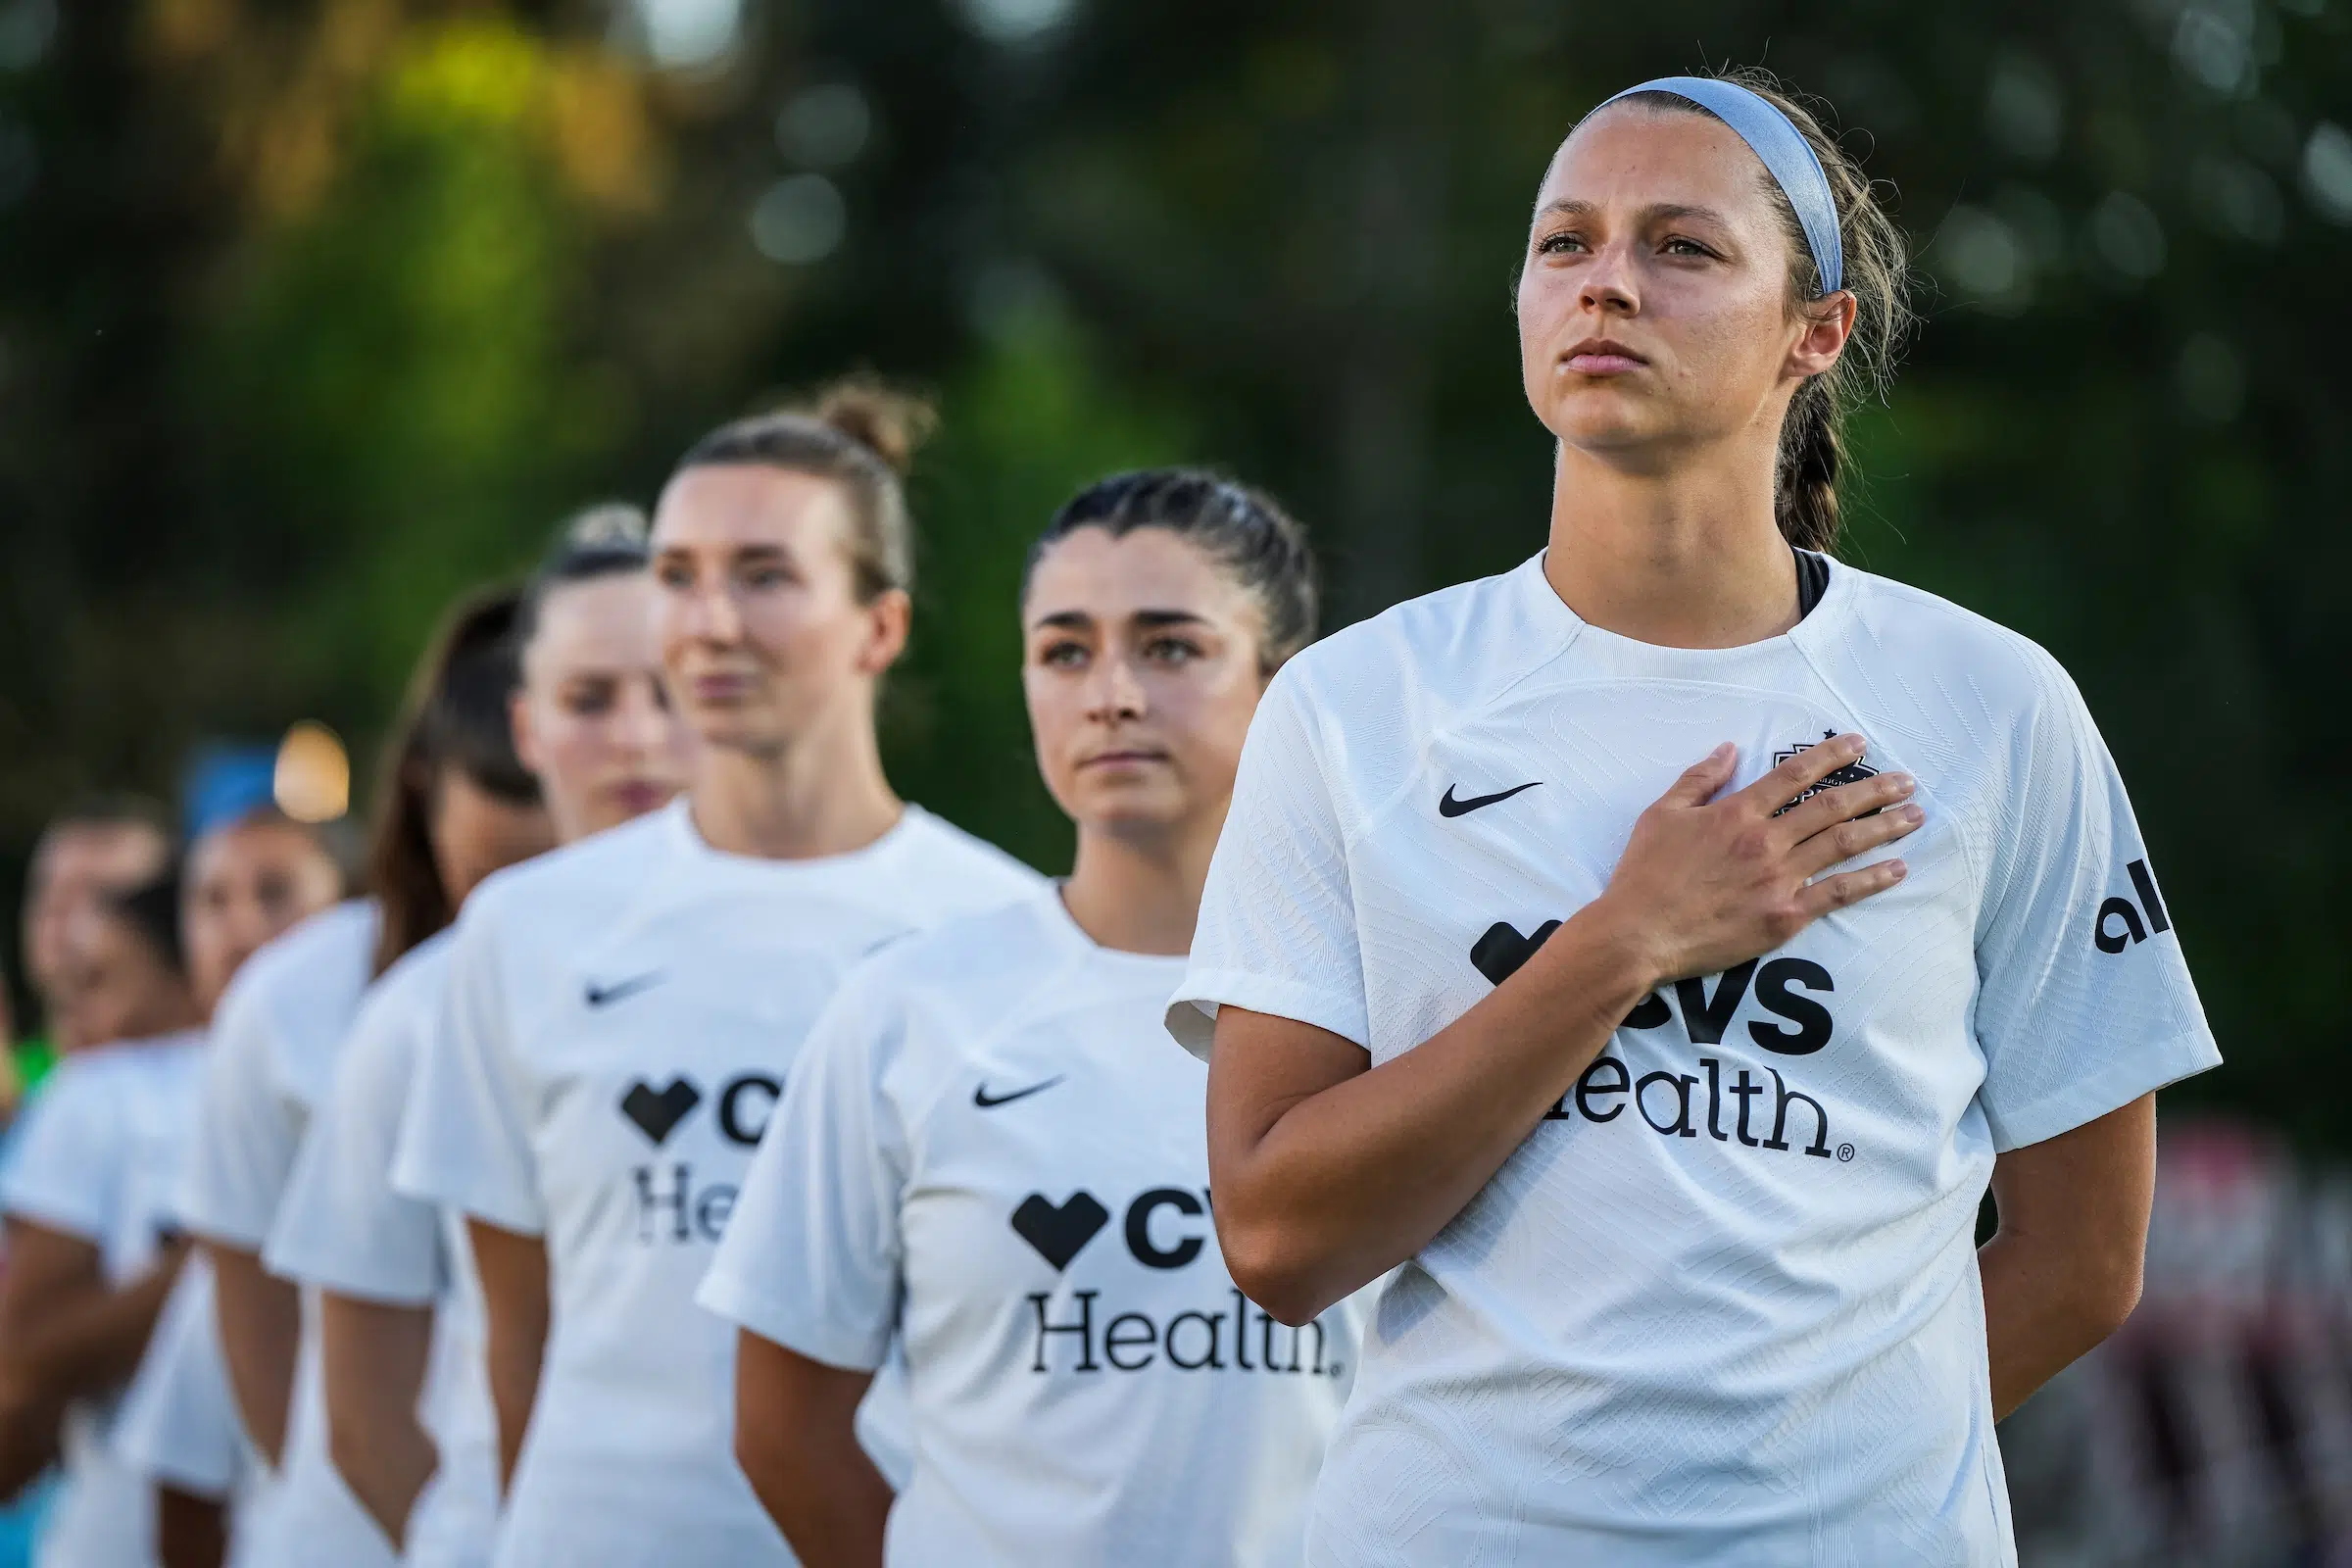 Ashley Hatch in a white uniforms stands at the front of a line of players in matching uniforms. She has her hand on her heart and looks off into the distance.